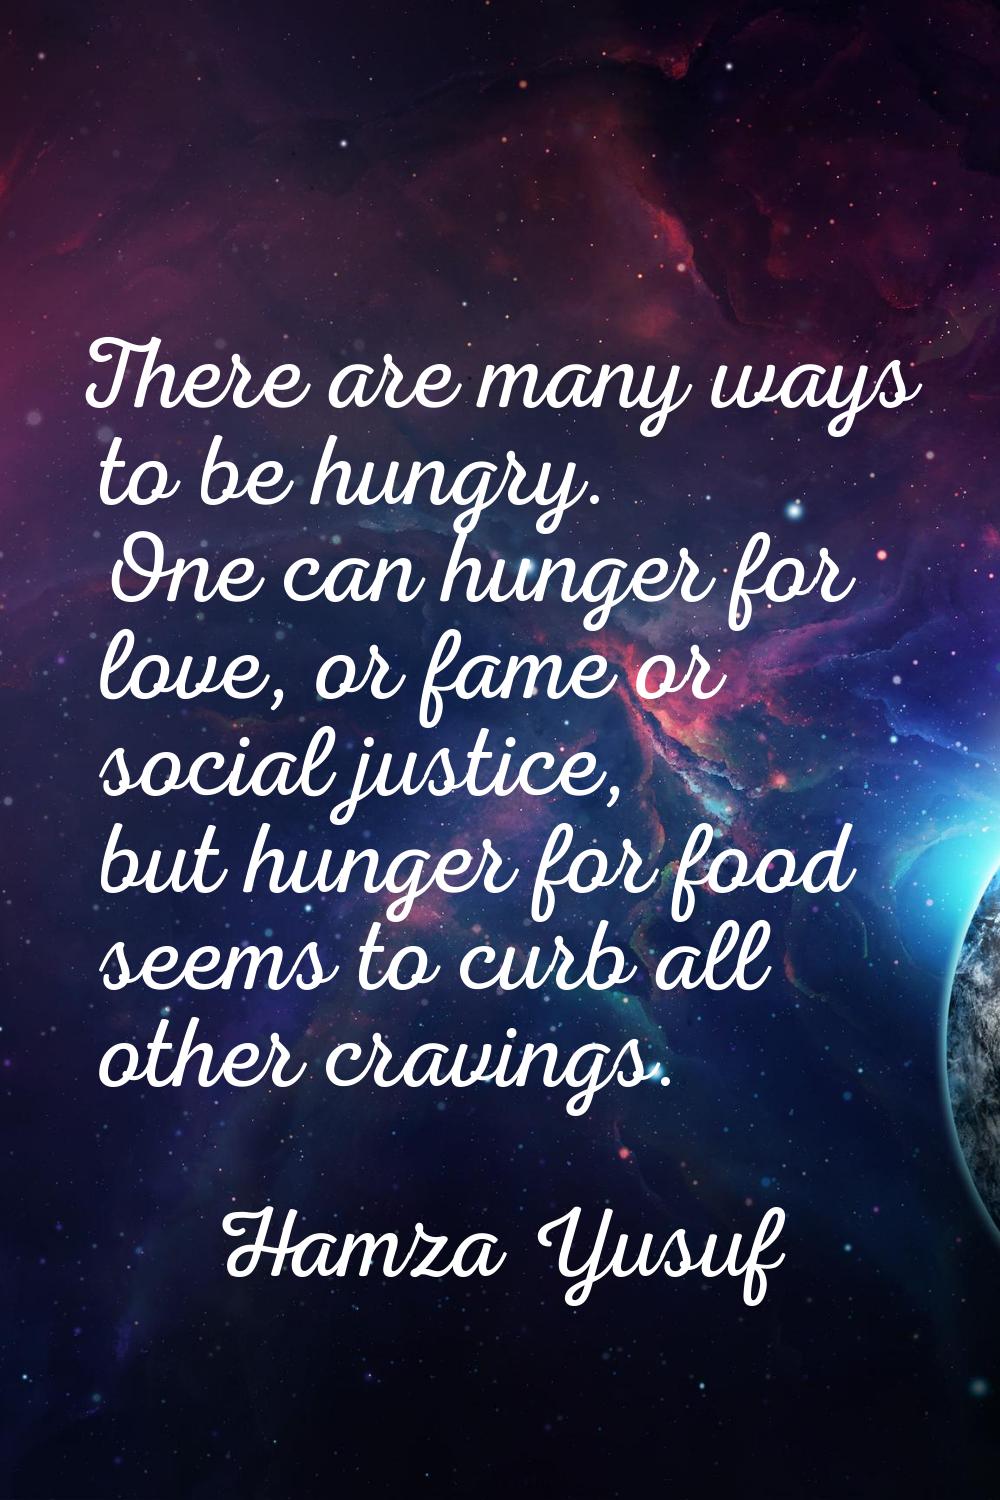 There are many ways to be hungry. One can hunger for love, or fame or social justice, but hunger fo